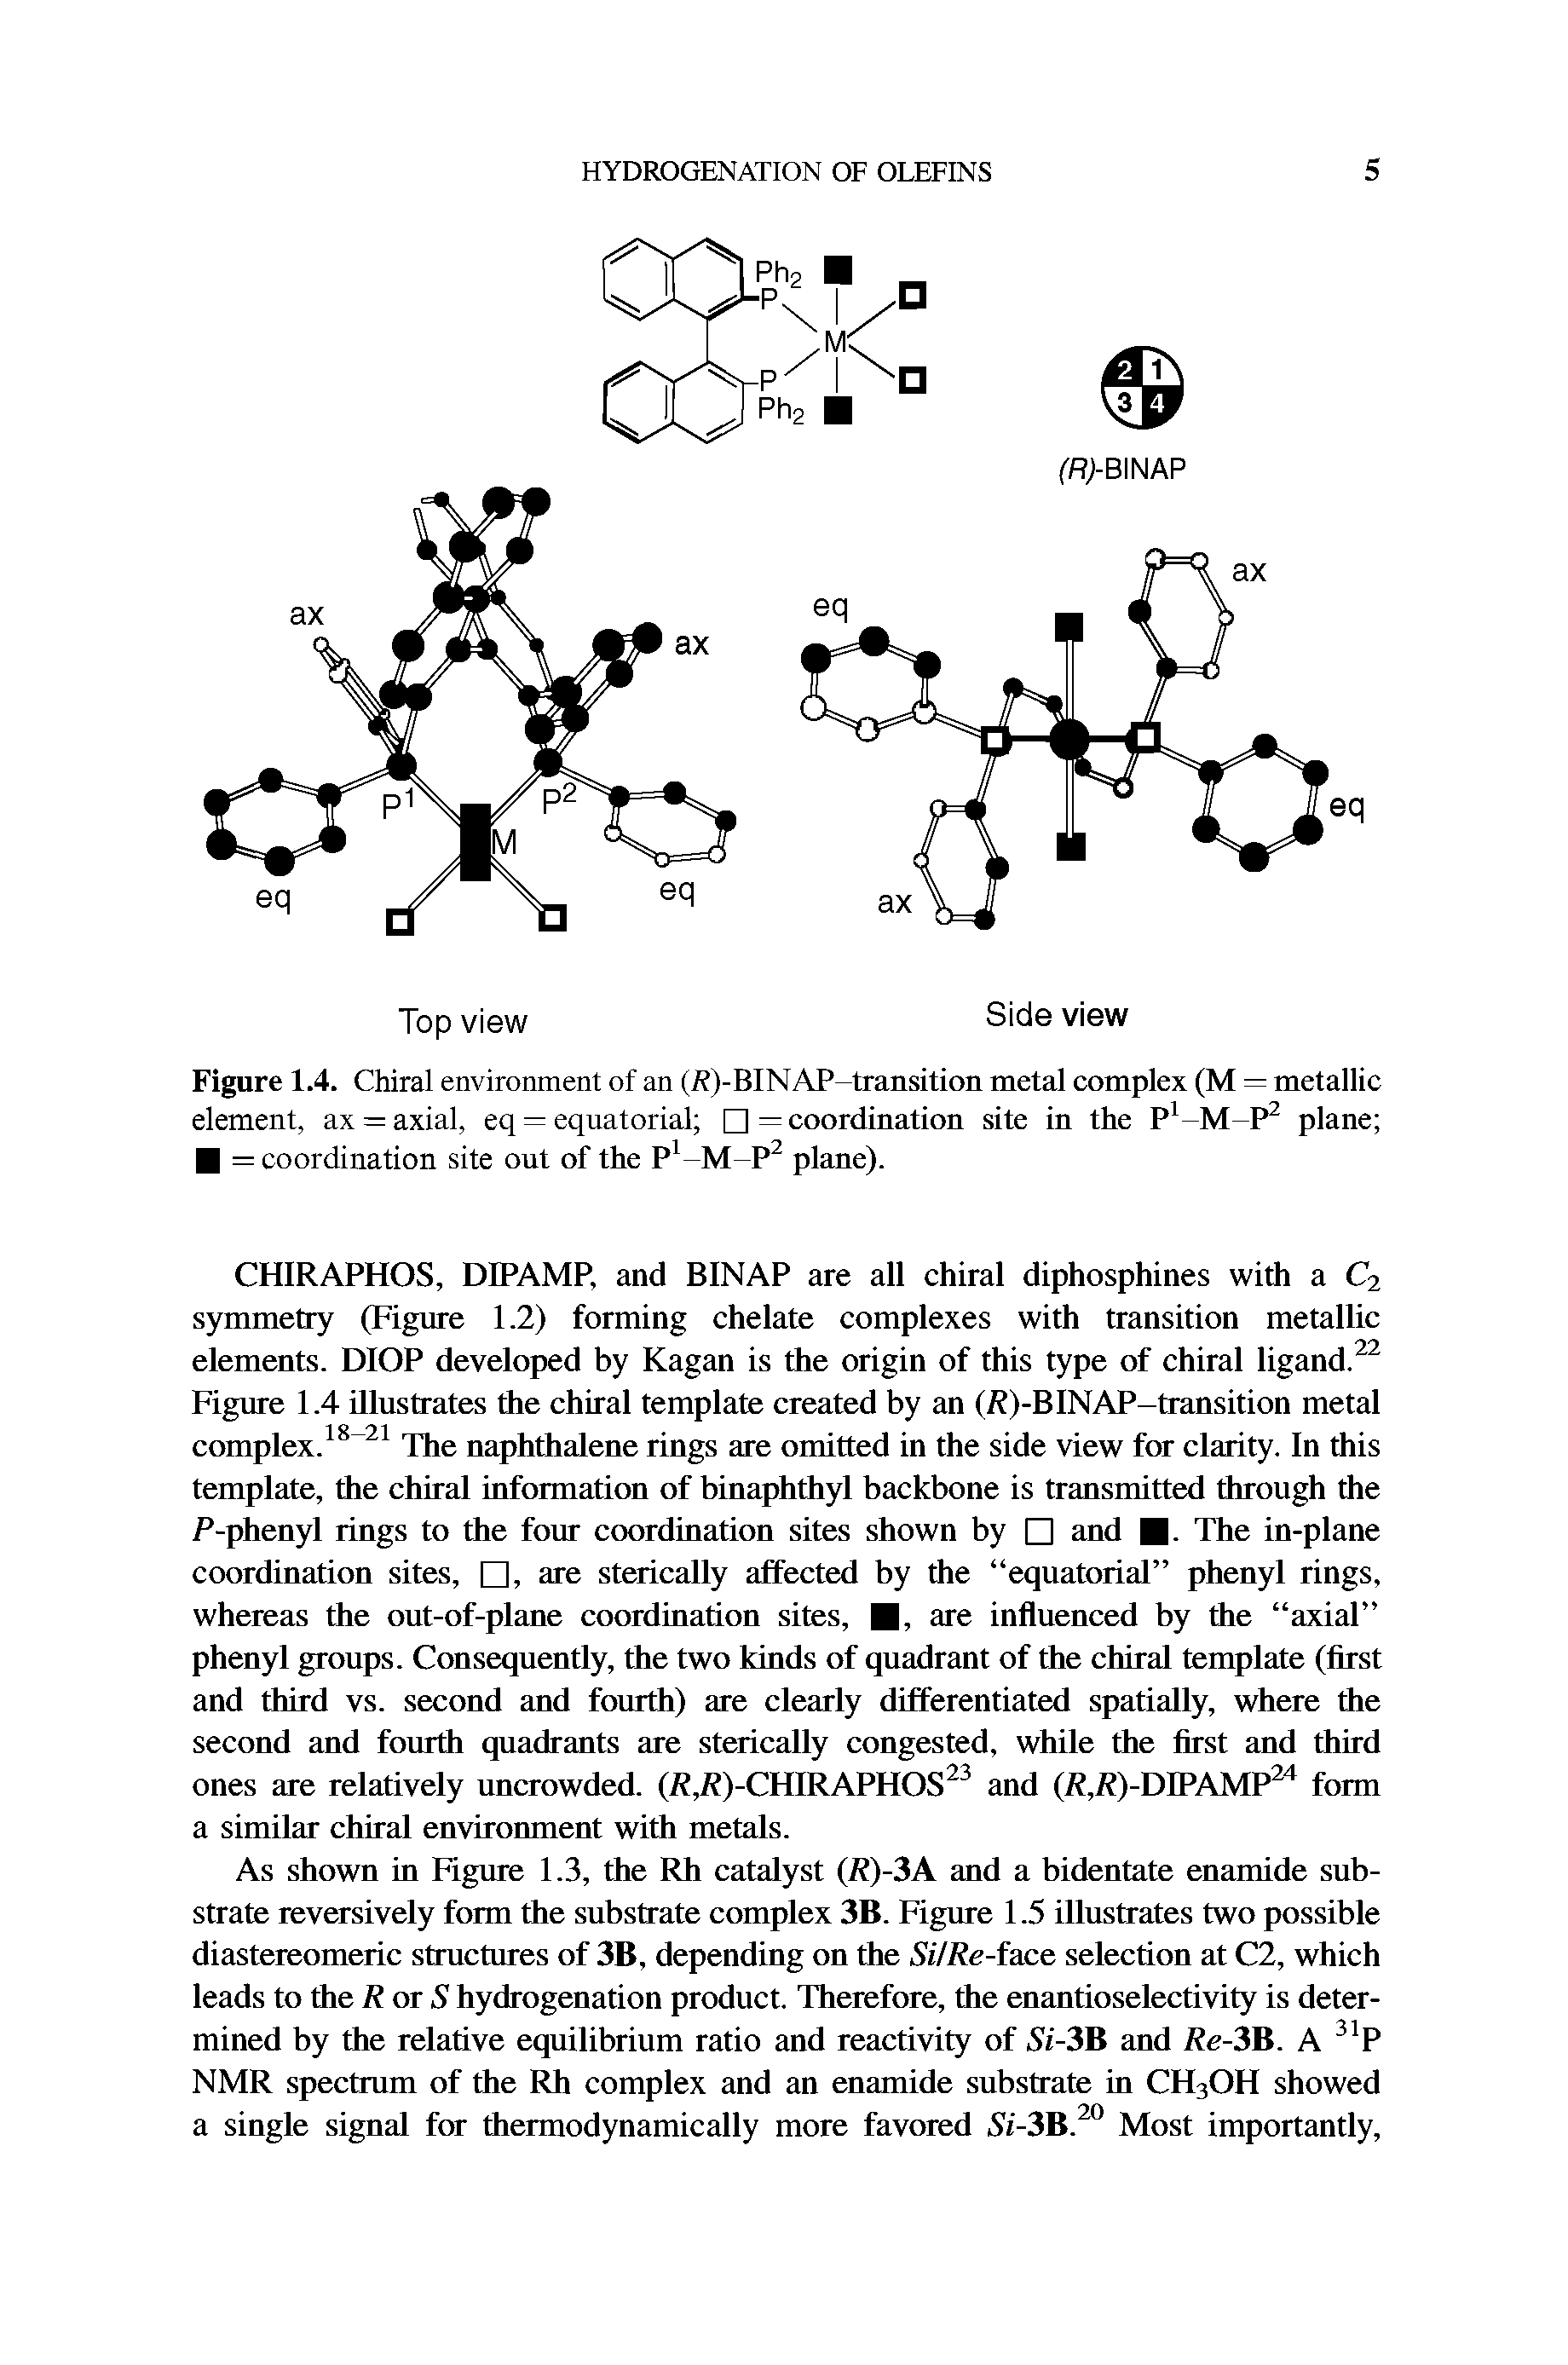 Figure 1.4. Chiral environment of an (i )-BINAP-transition metal complex (M = metallic element, ax = axial, eq = equatorial = coordination site in the plane ...